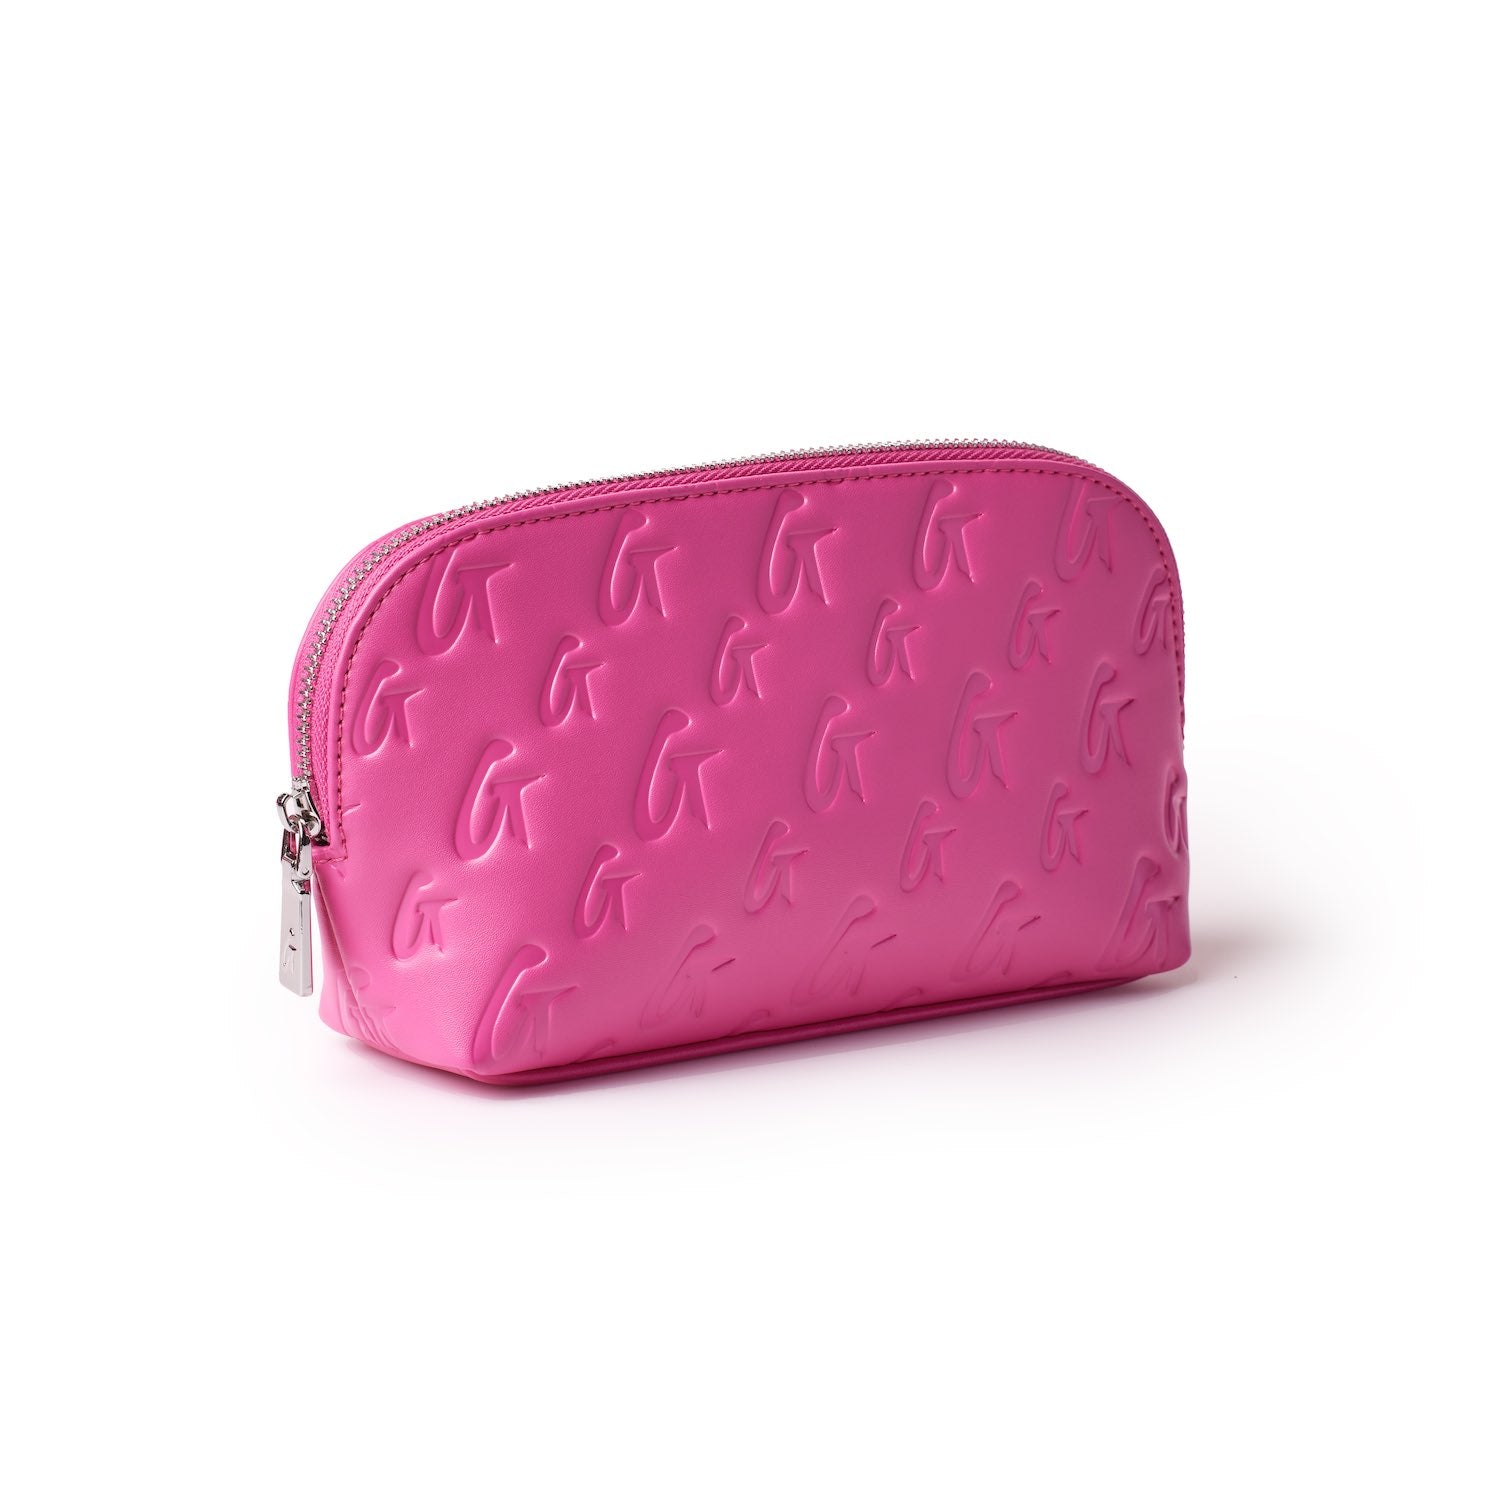 MONOGRAM COSMETIC POUCH BLACK X PINK – Glam-Aholic Lifestyle